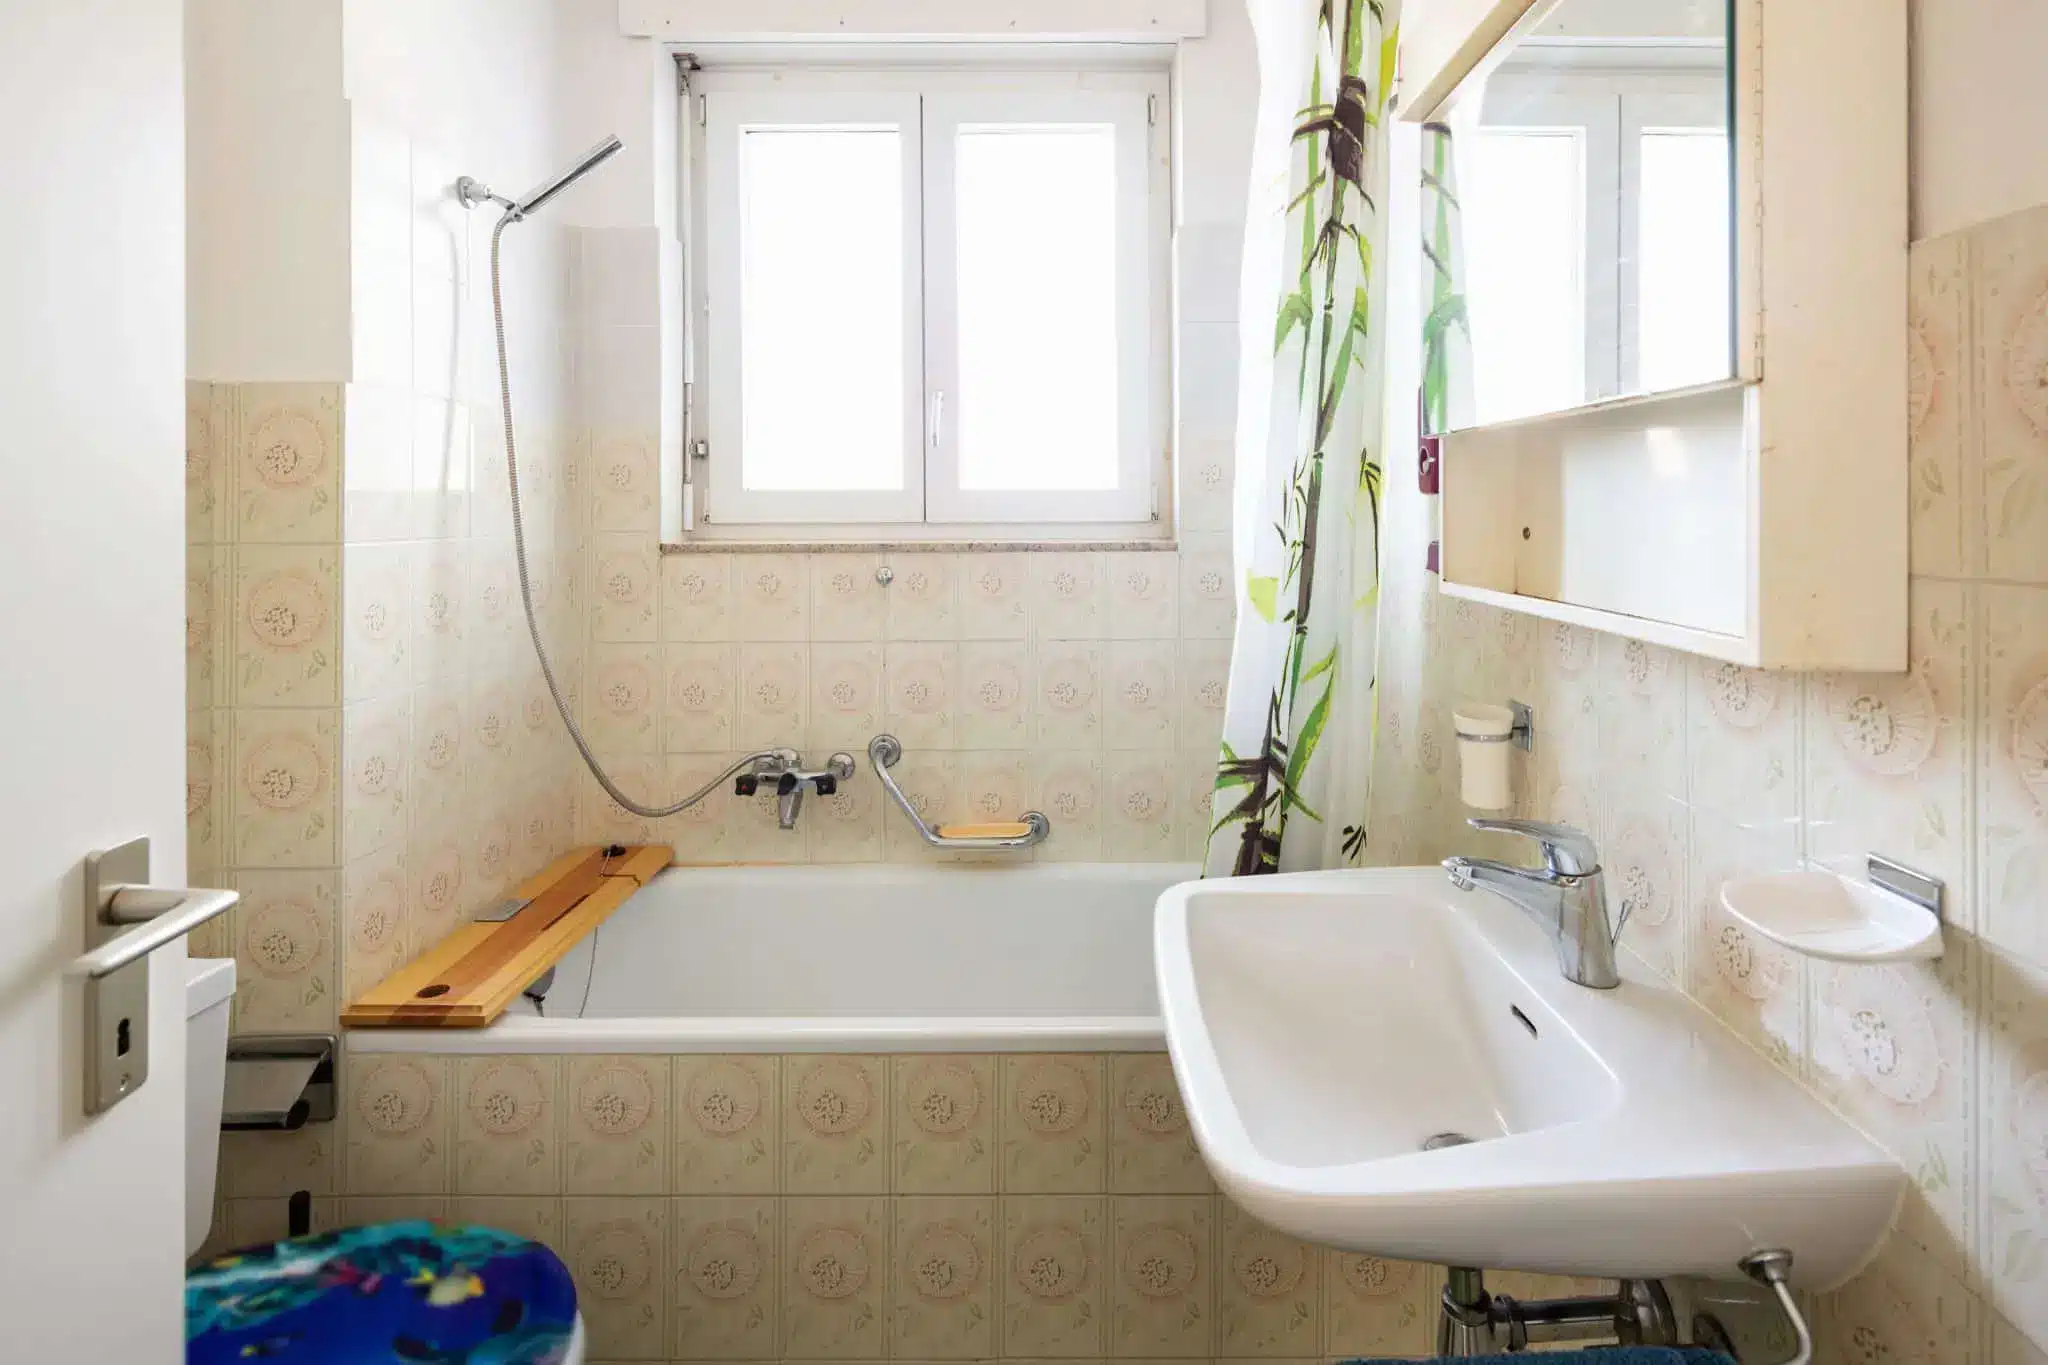 Vintage bathroom with green tiles and window